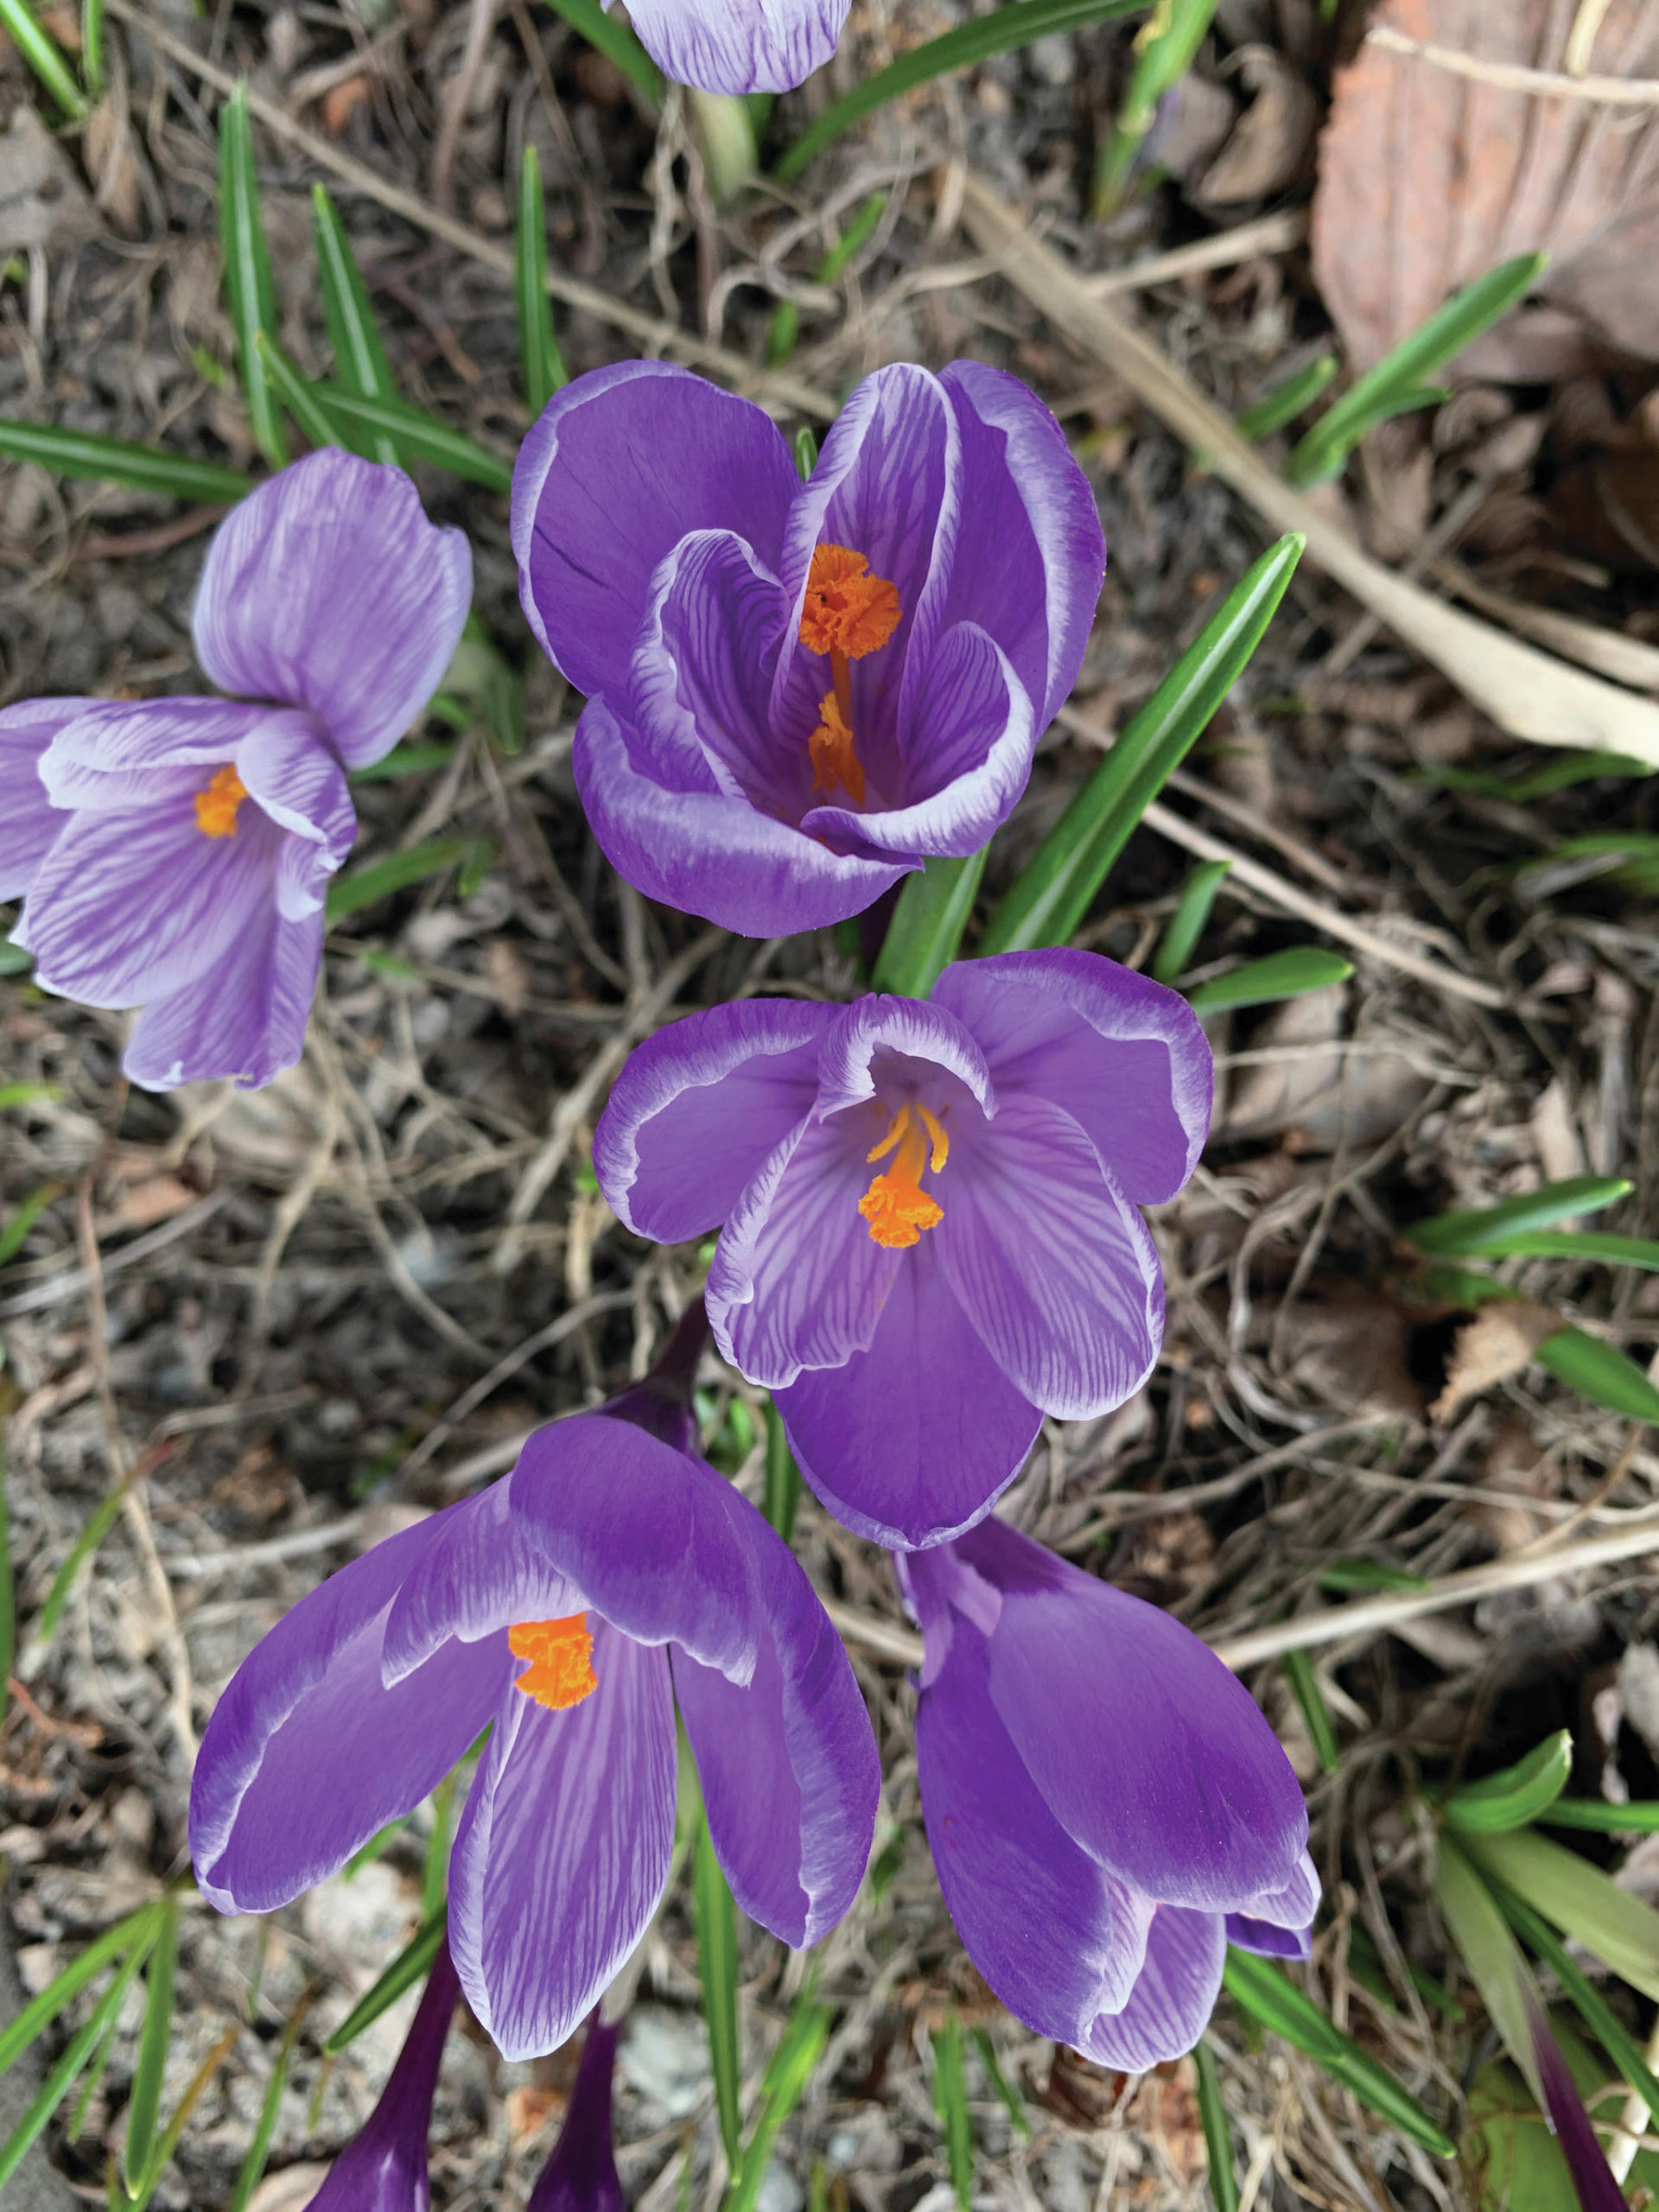 A sure sign of spring is crocuses blooming in front of the Homer Bookstore, as seen here in this photo taken on Tuesday, April 20, 2021, in Homer, Alaska. (Photo by Rosemary Fitzpatrick)